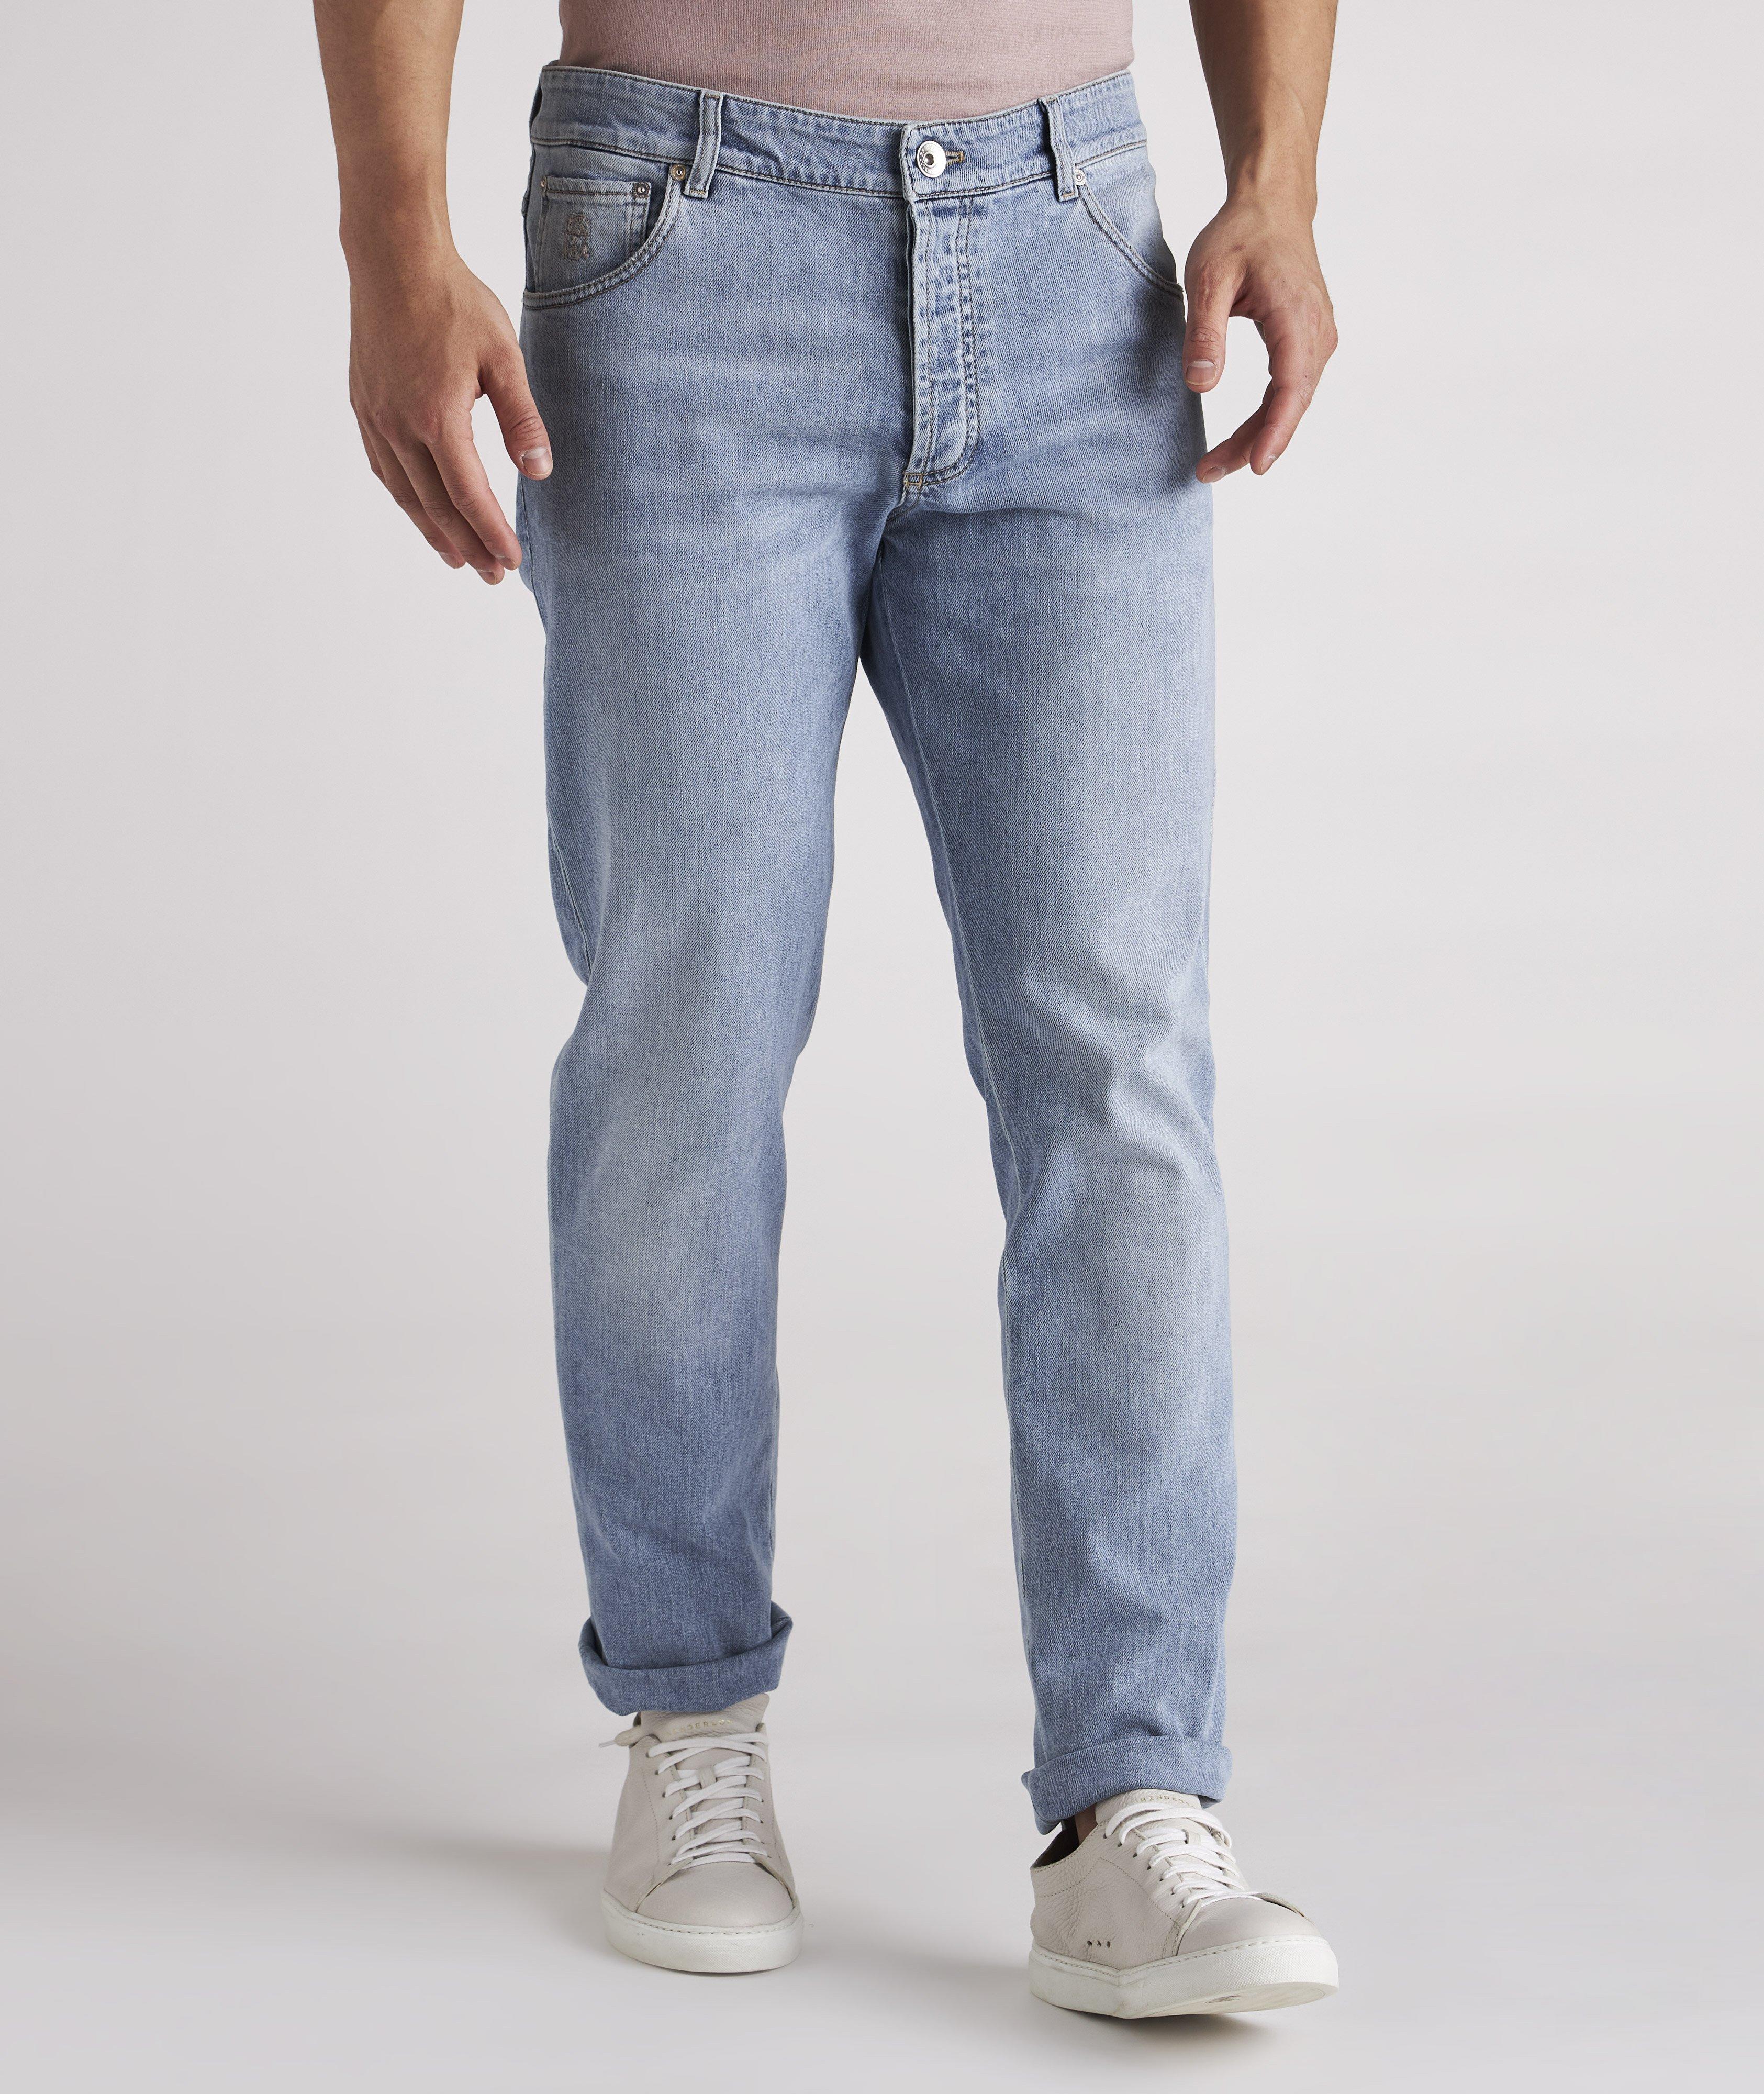 Skinny-Fit Stretch-Cotton Jeans image 2